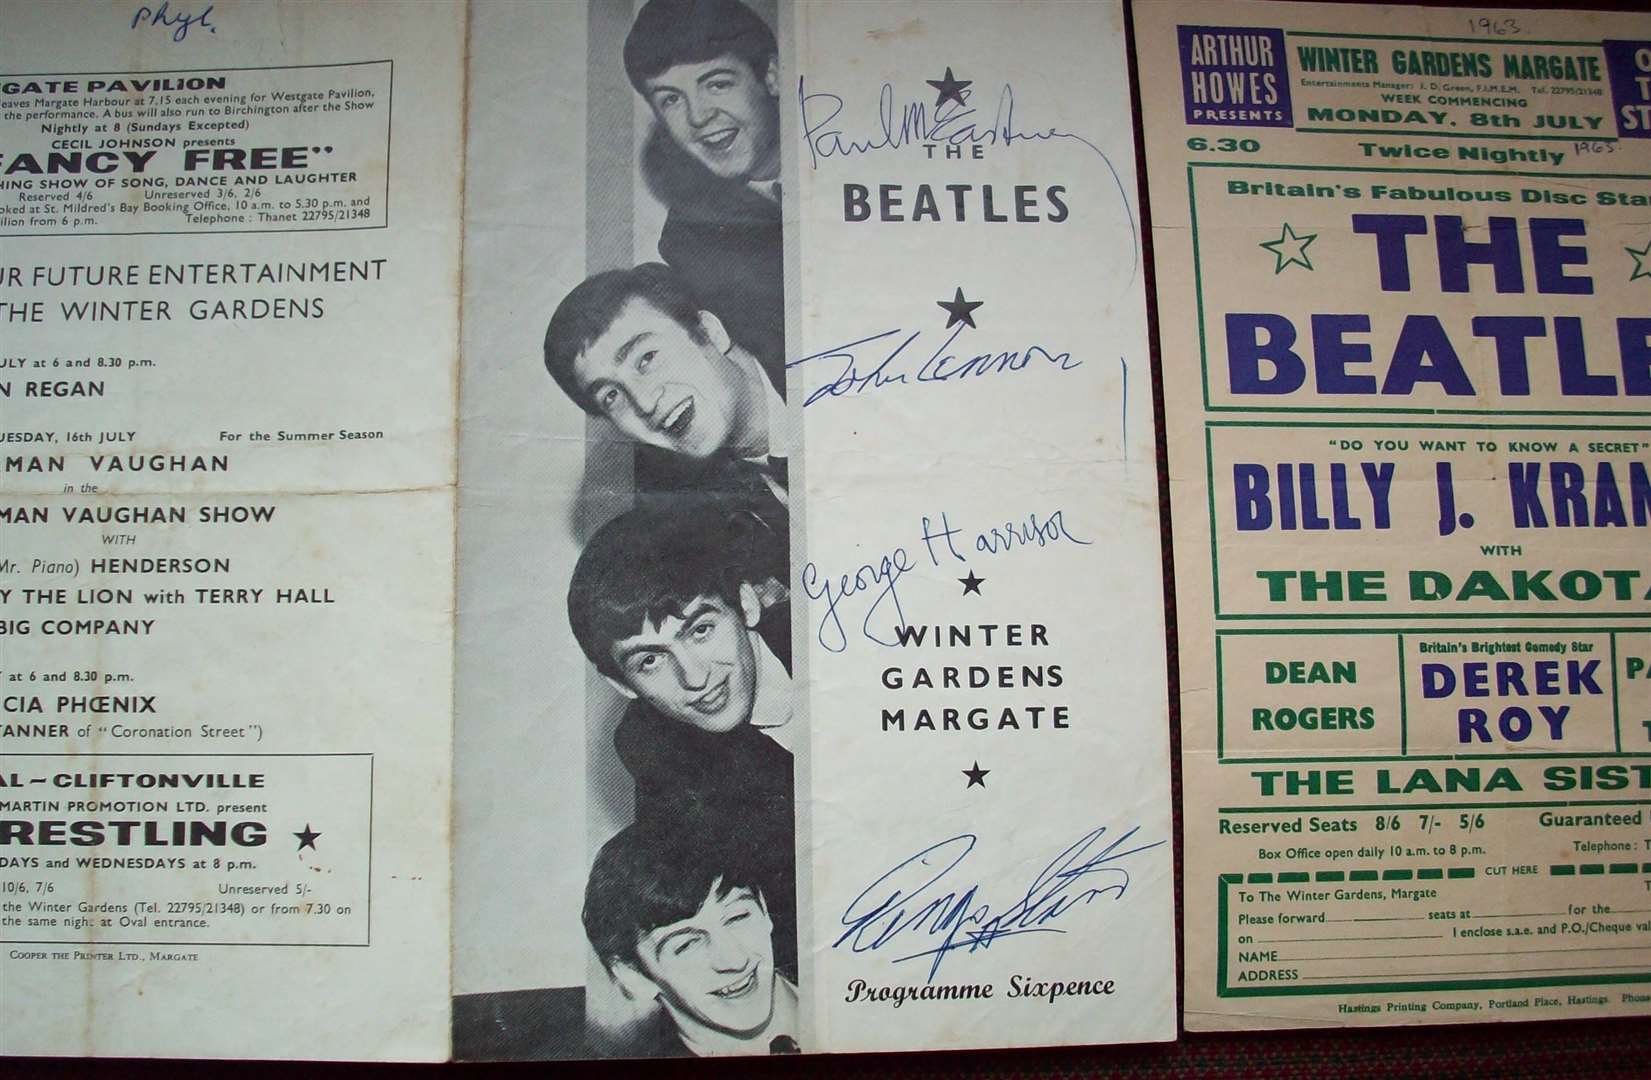 The Beatles were among the many acts to play at the Winter Gardens, Margate